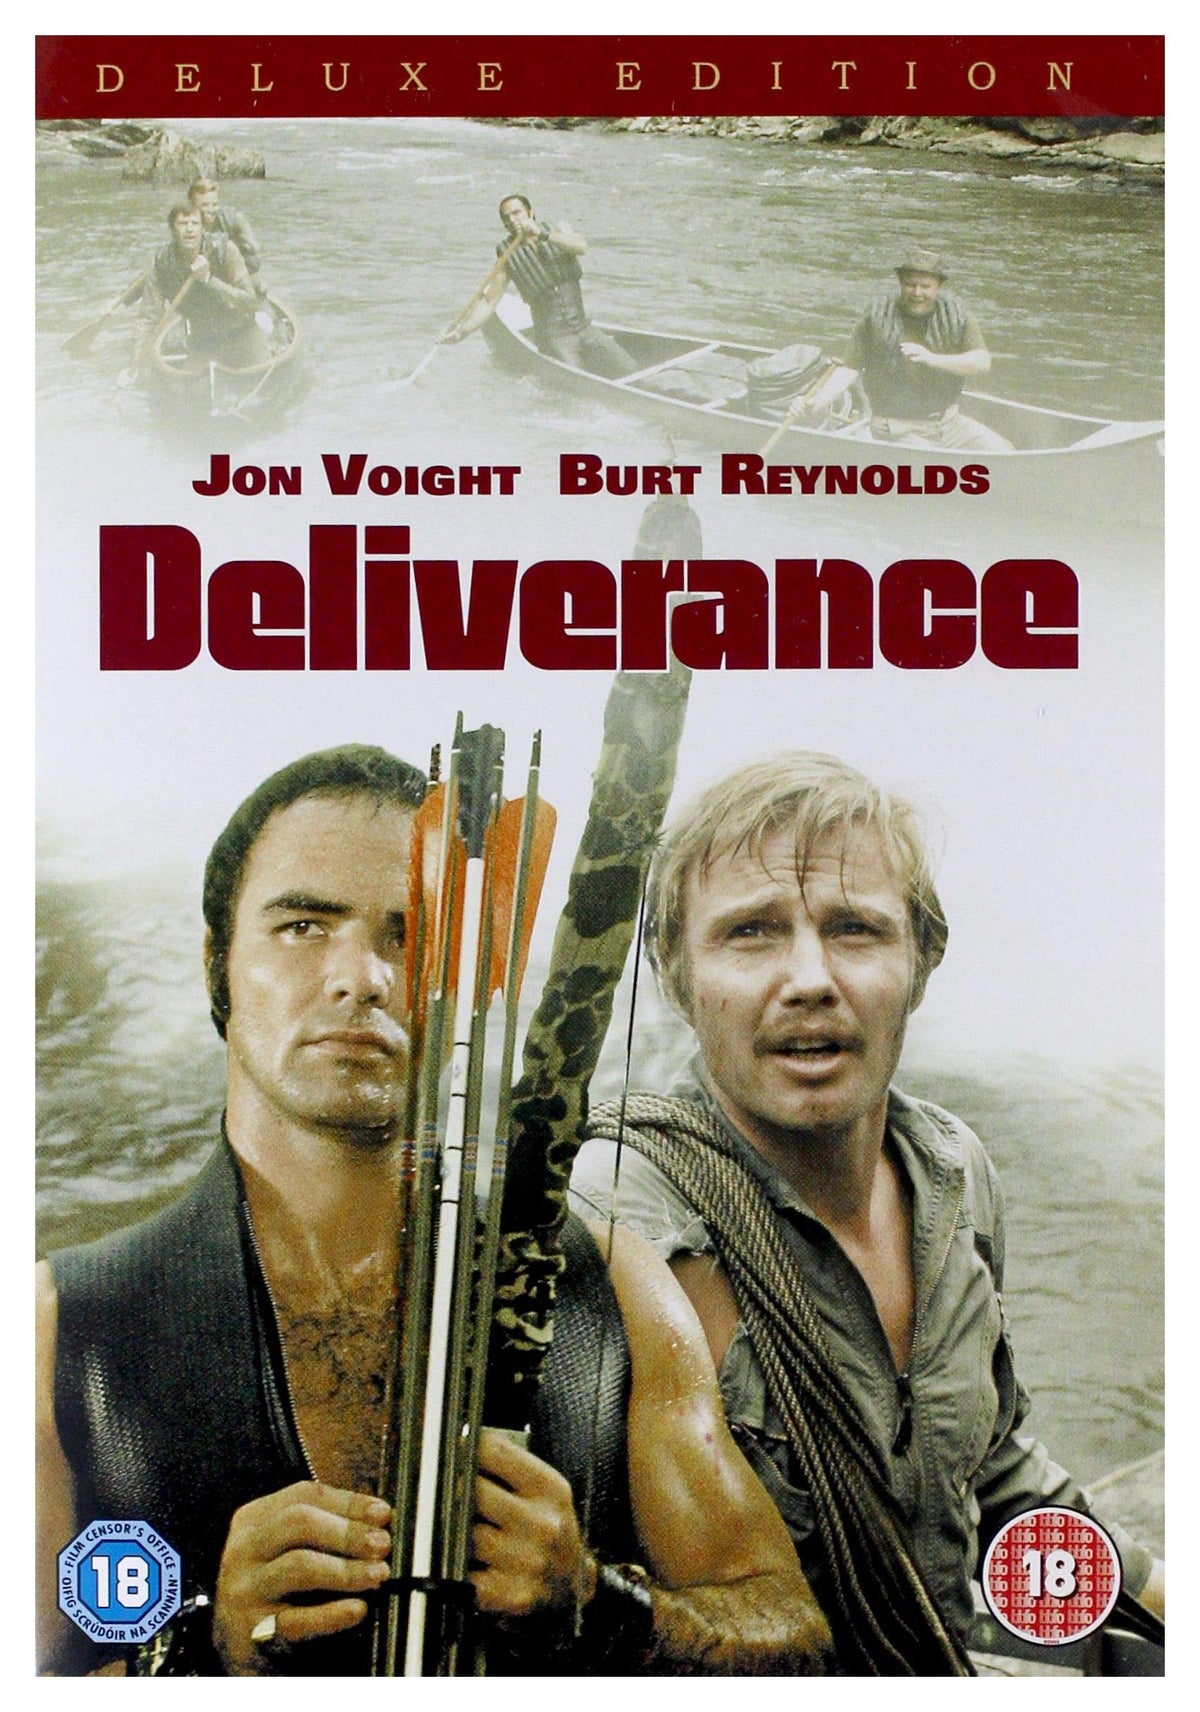 Deliverance [Remastered Deluxe Edition] [DVD] [1972]